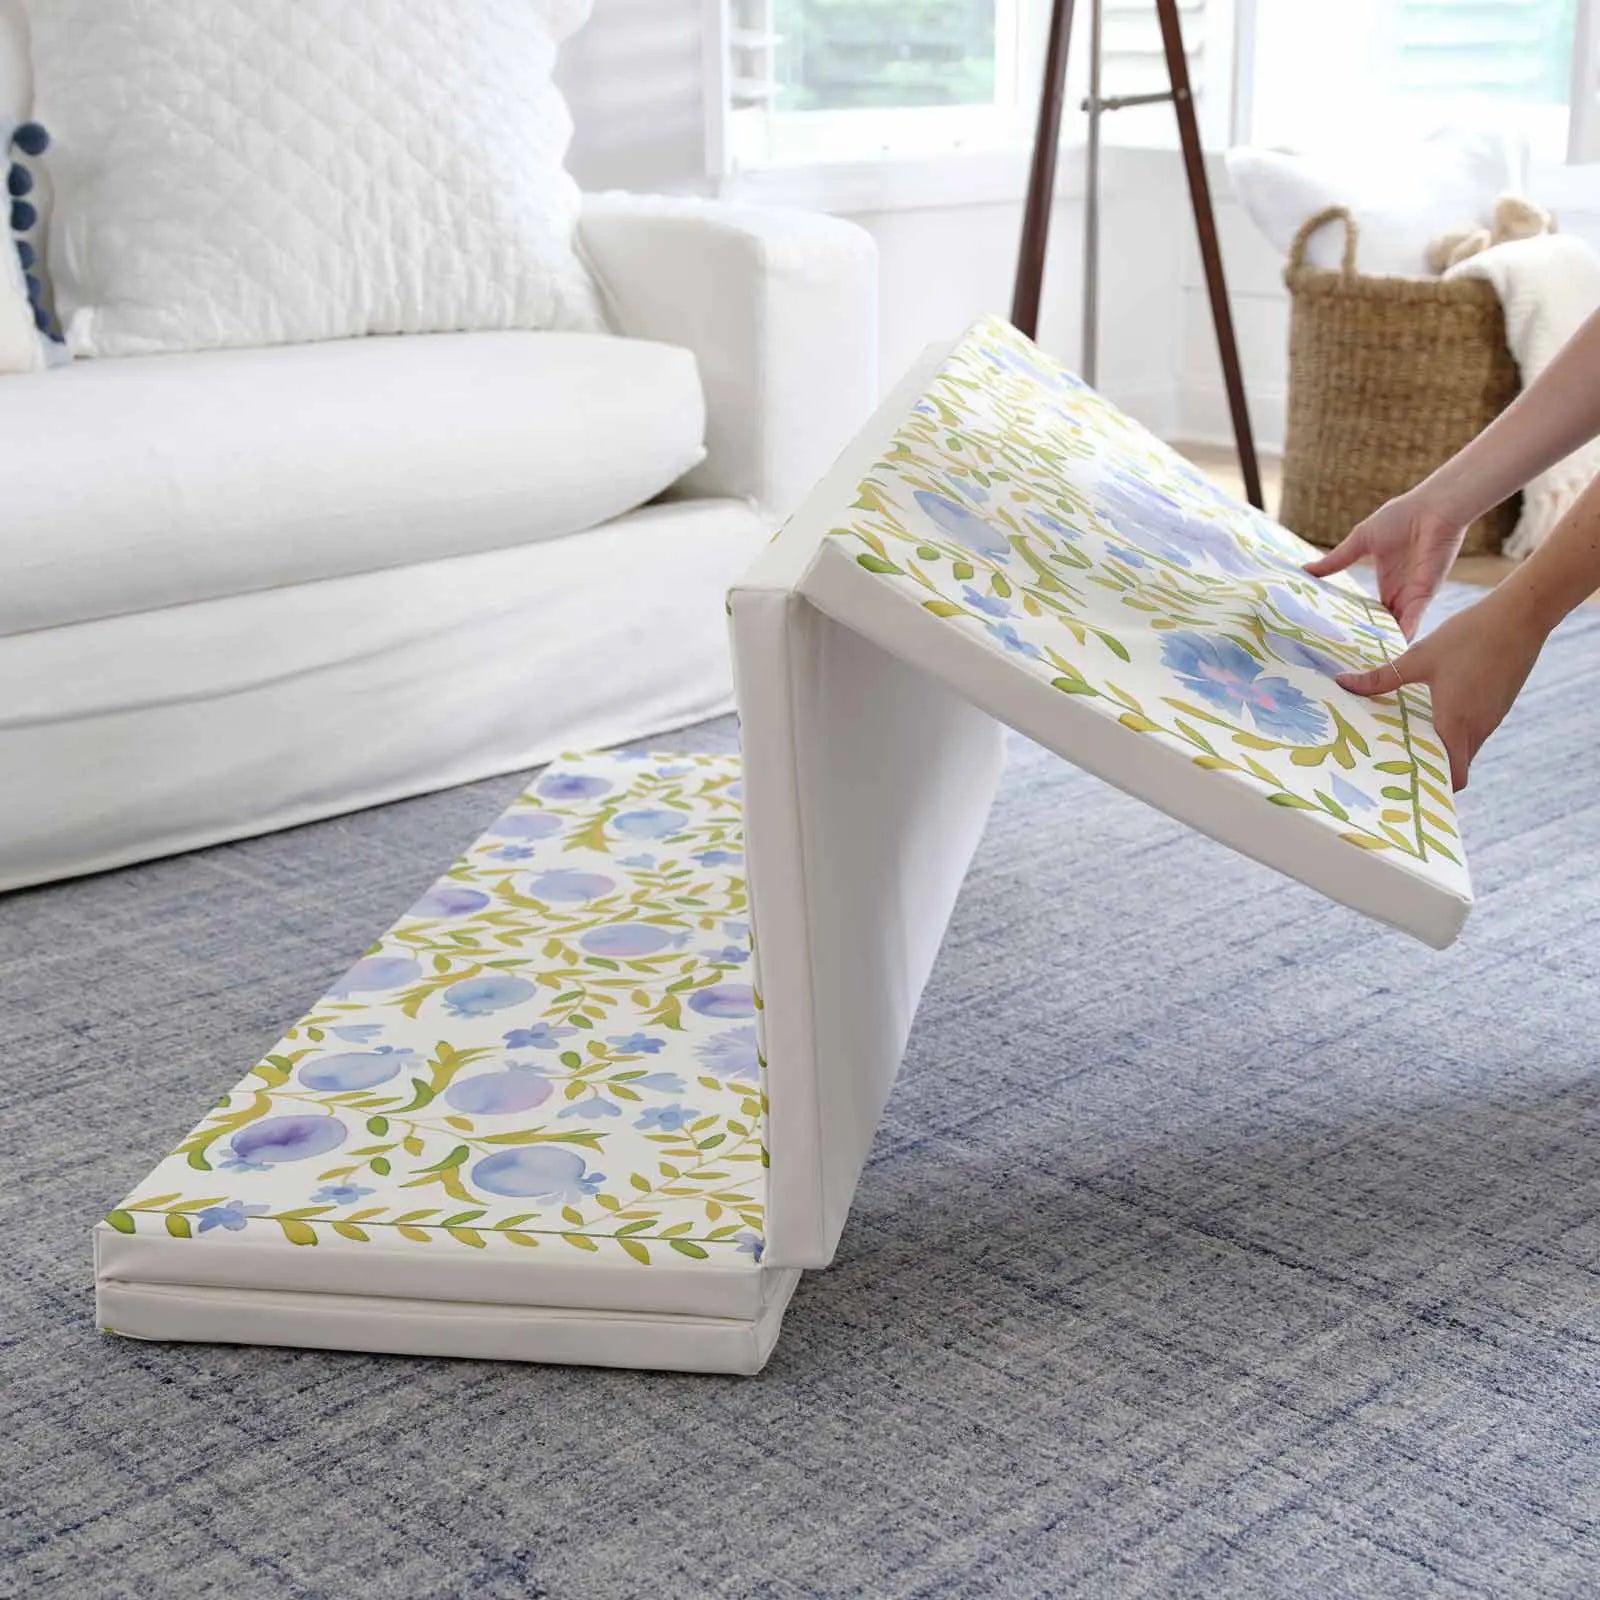 Bluebell blue green and white floral tumbling mat shown in living room with 2 panels folded up and the other 2 panels being folded by a womans hands